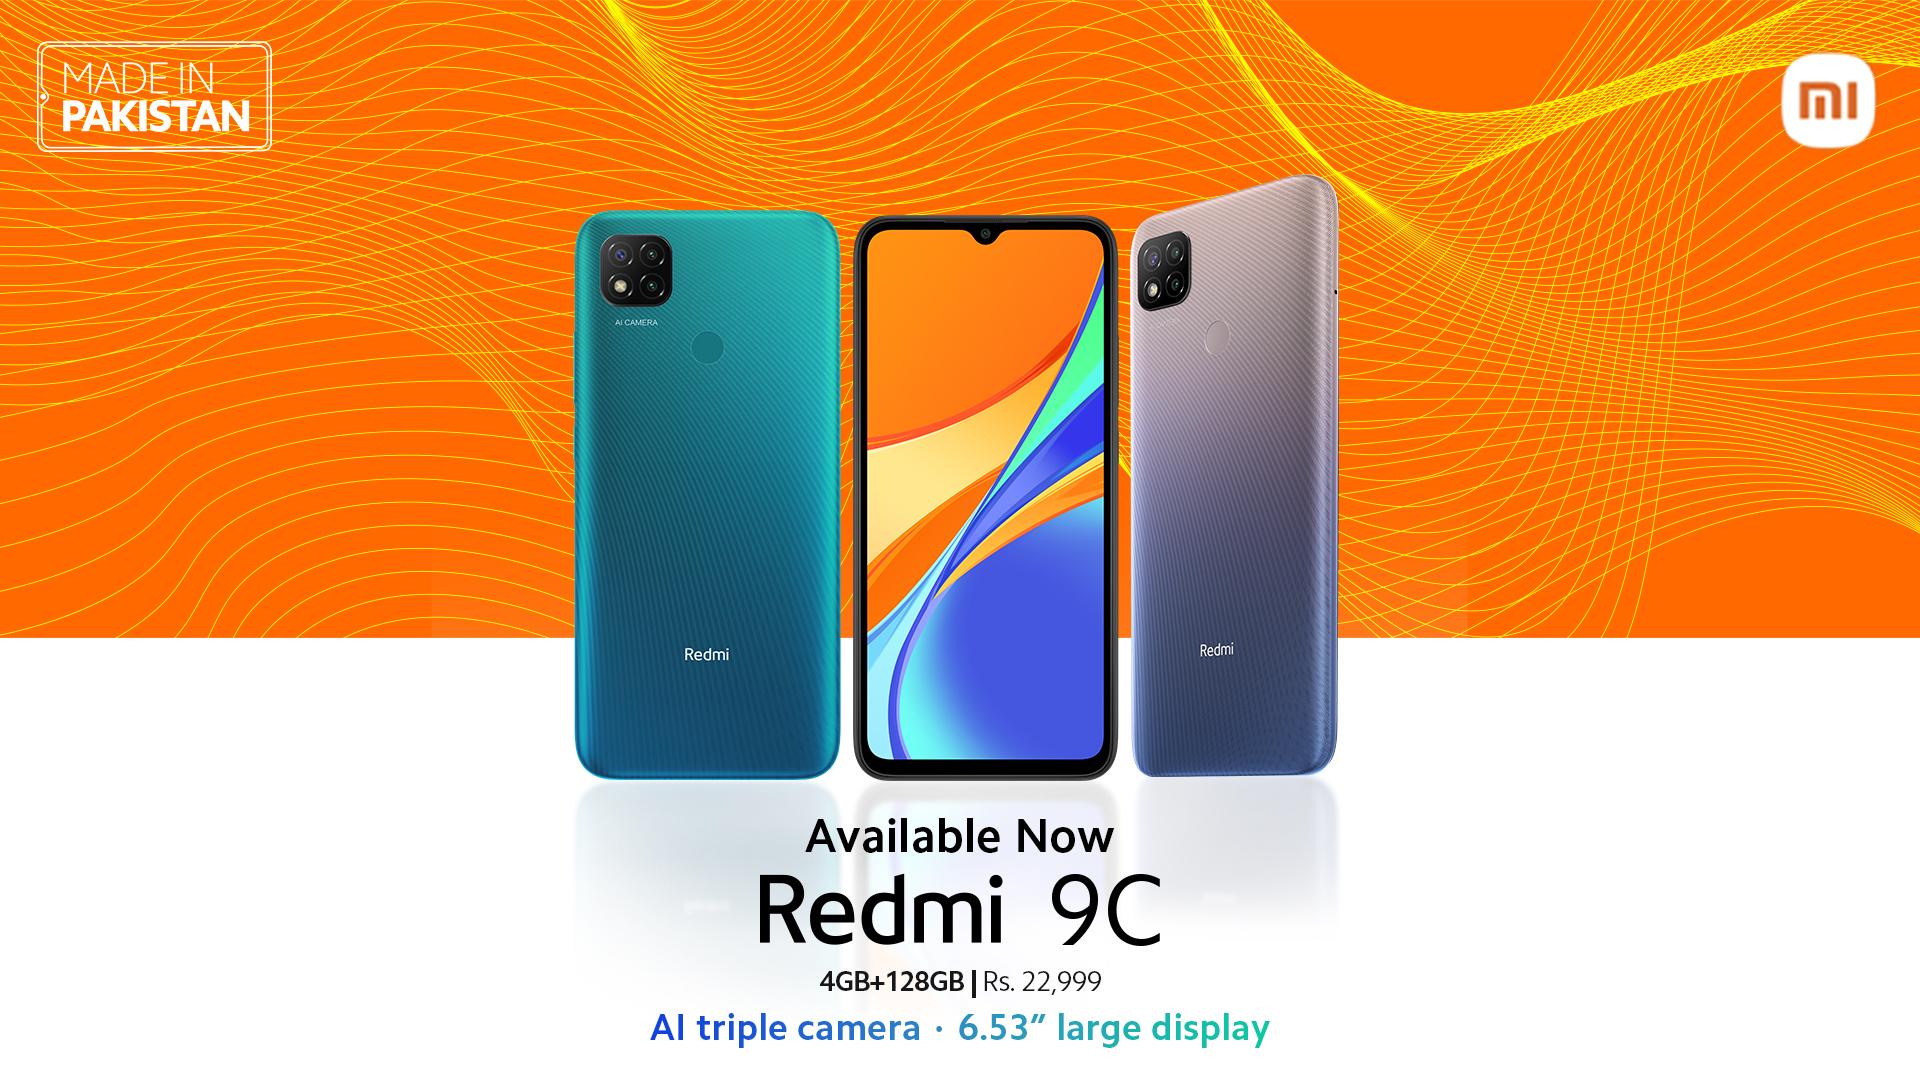 Redmi 9C – First in the legacy of Made in Pakistan